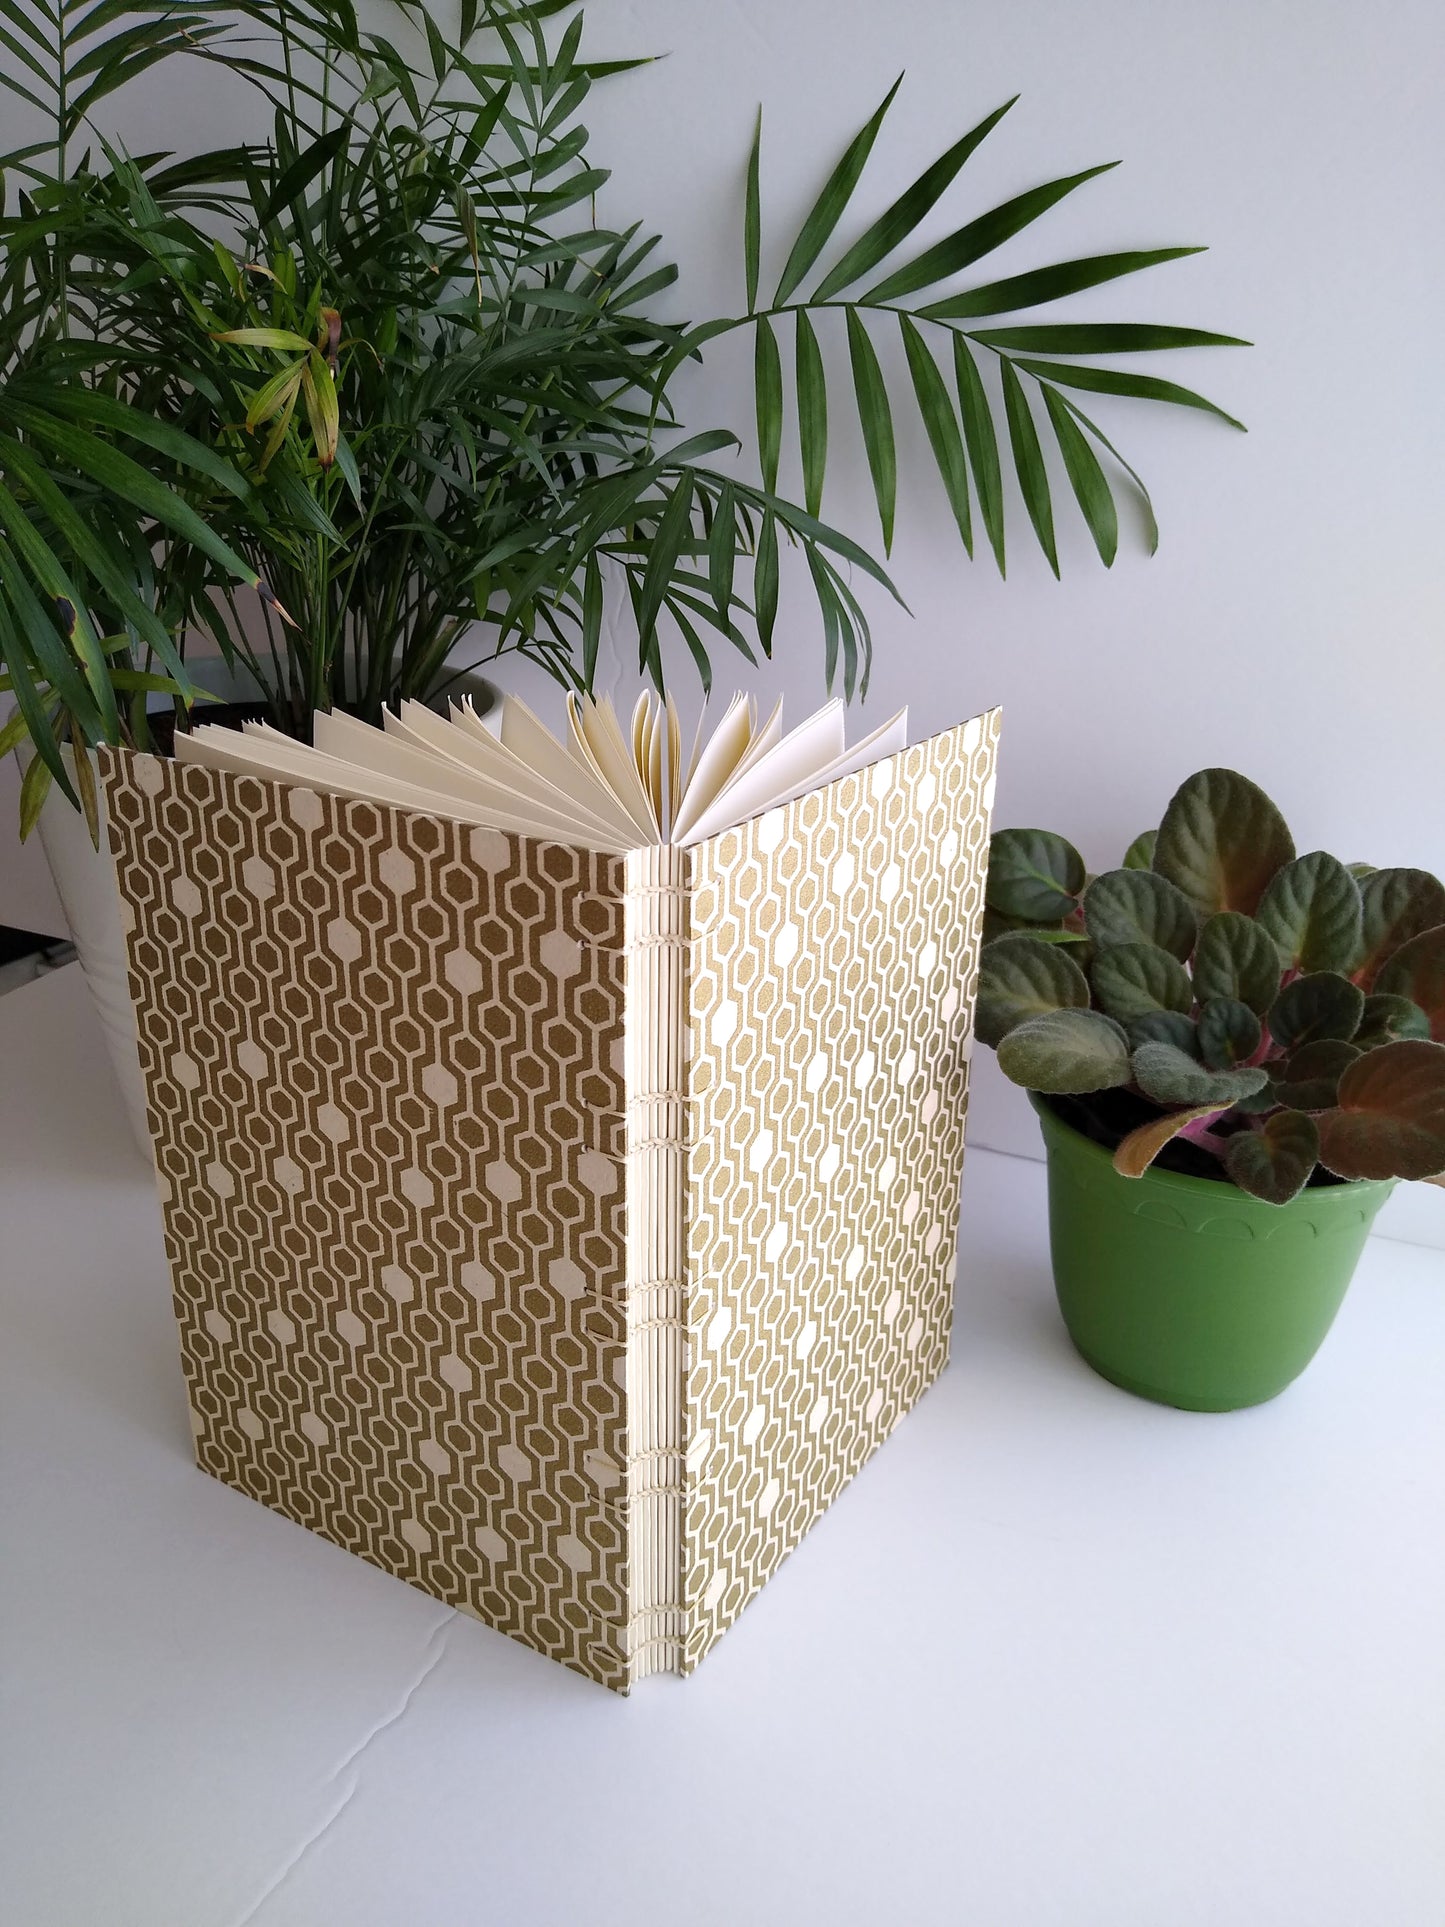 A handmade journal sits upright beside two potted plants. The cover of the journal is cream with gold hexagons. It faces the camera so the open spine is visible, stitched together with cream thread.